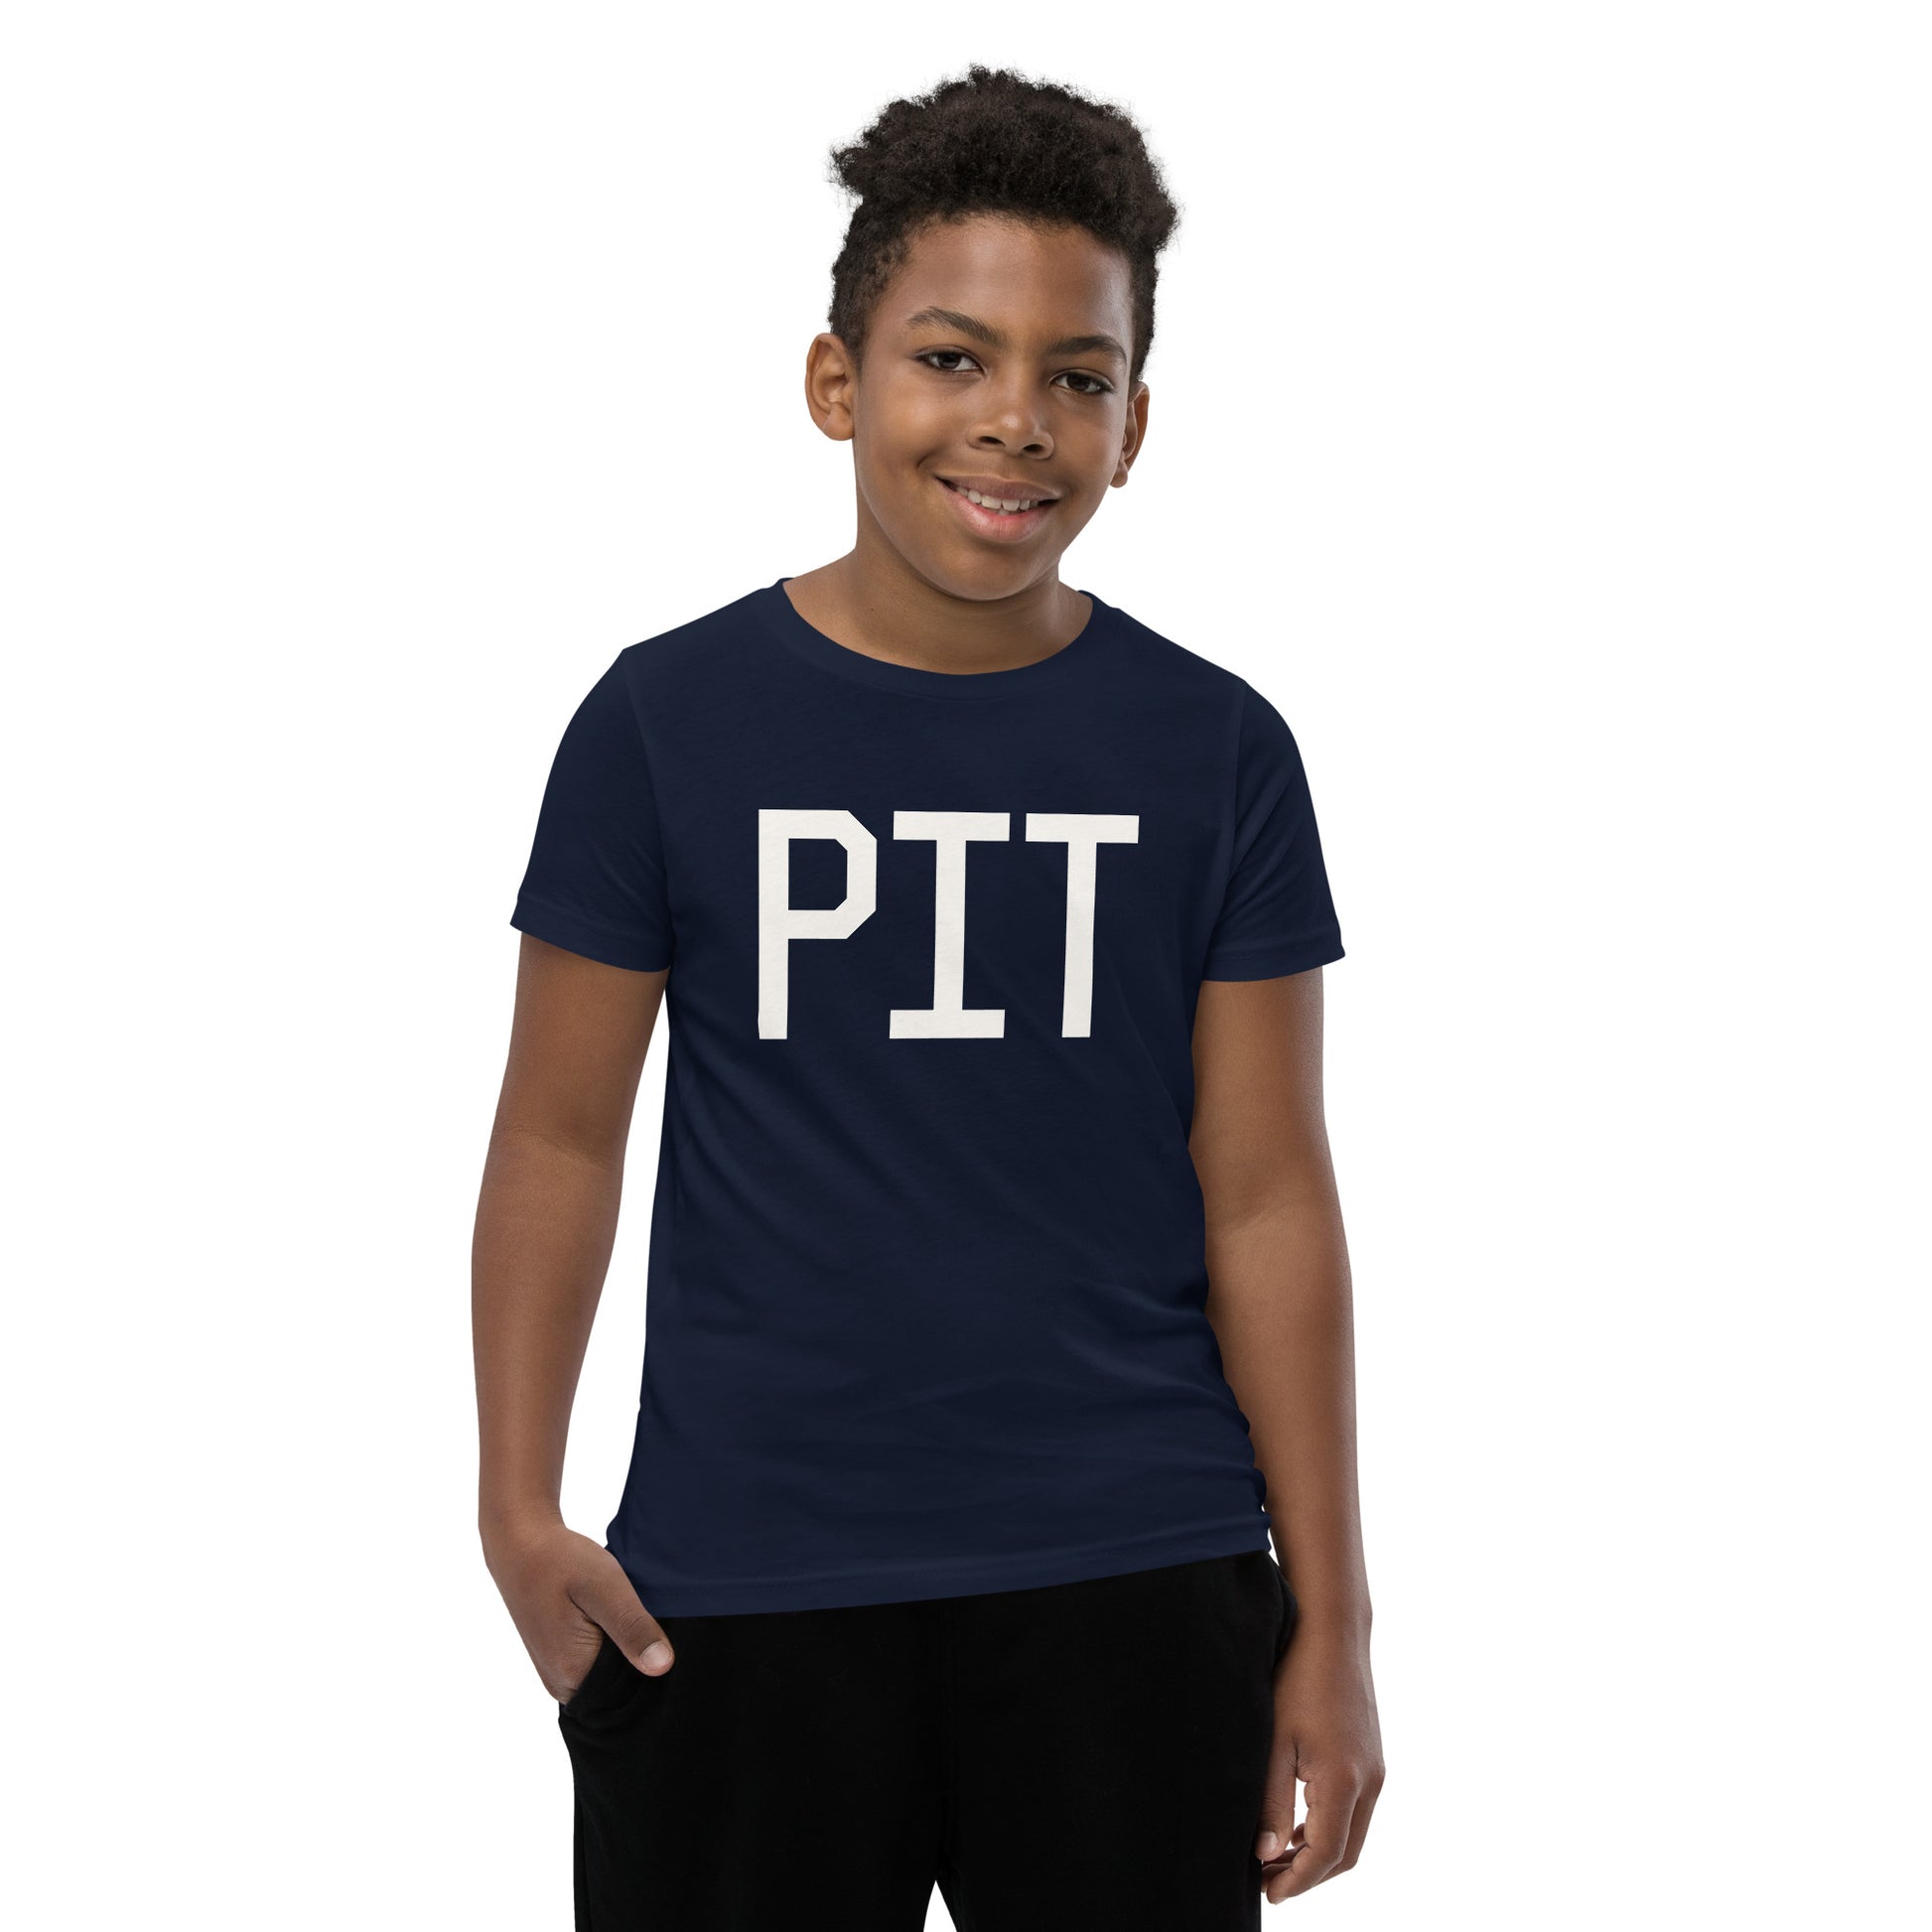 Kid's T-Shirt - White Graphic • PIT Pittsburgh • YHM Designs - Image 01